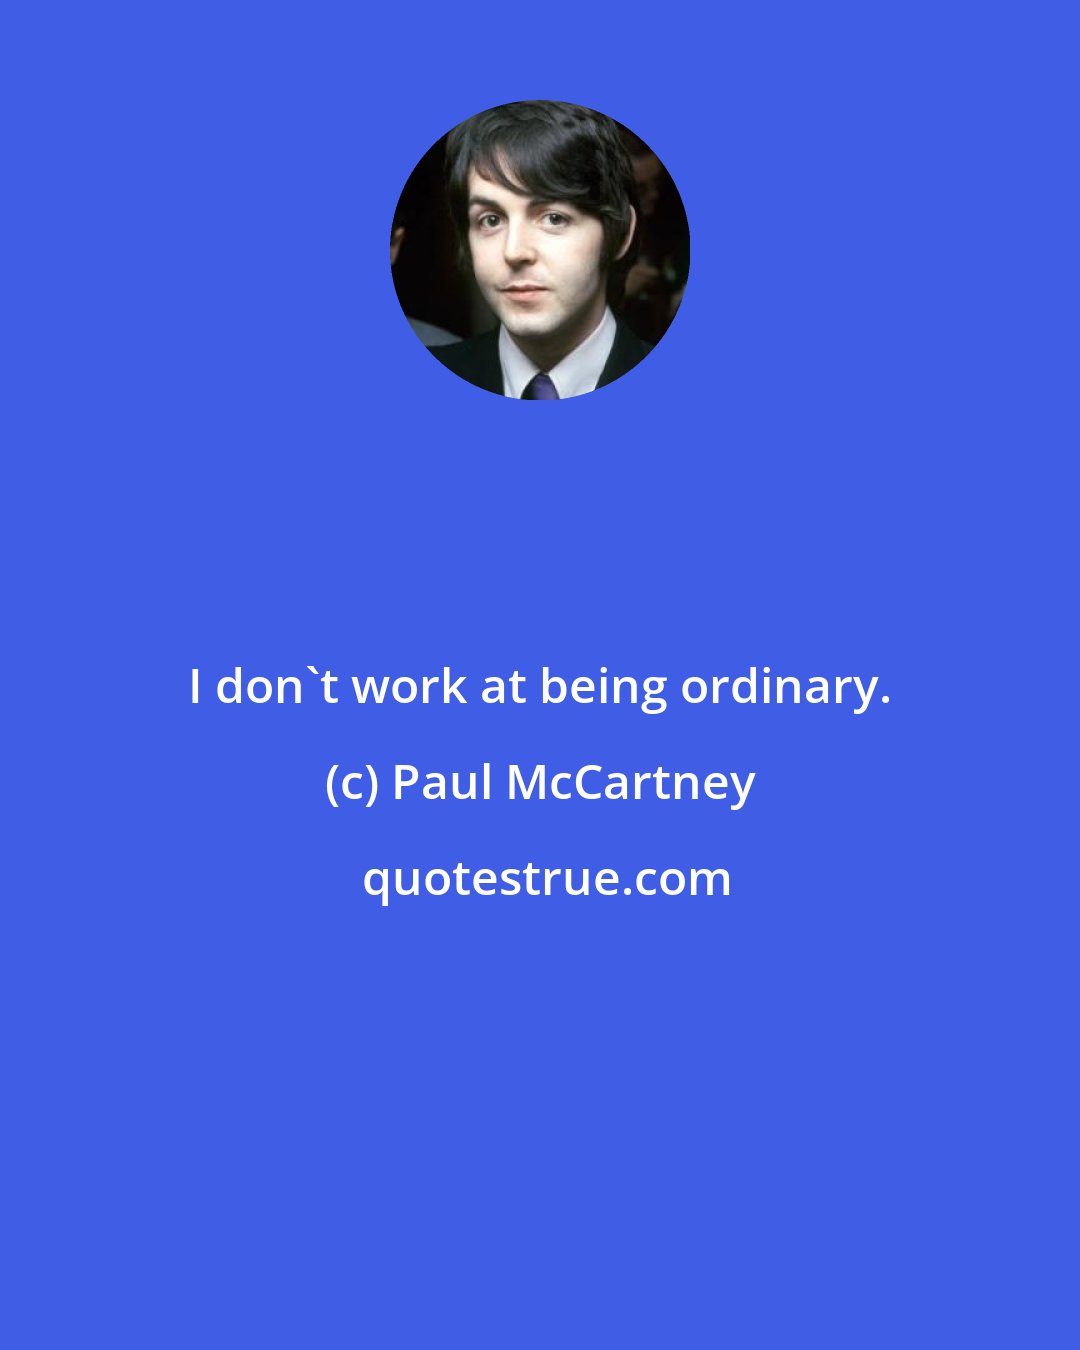 Paul McCartney: I don't work at being ordinary.